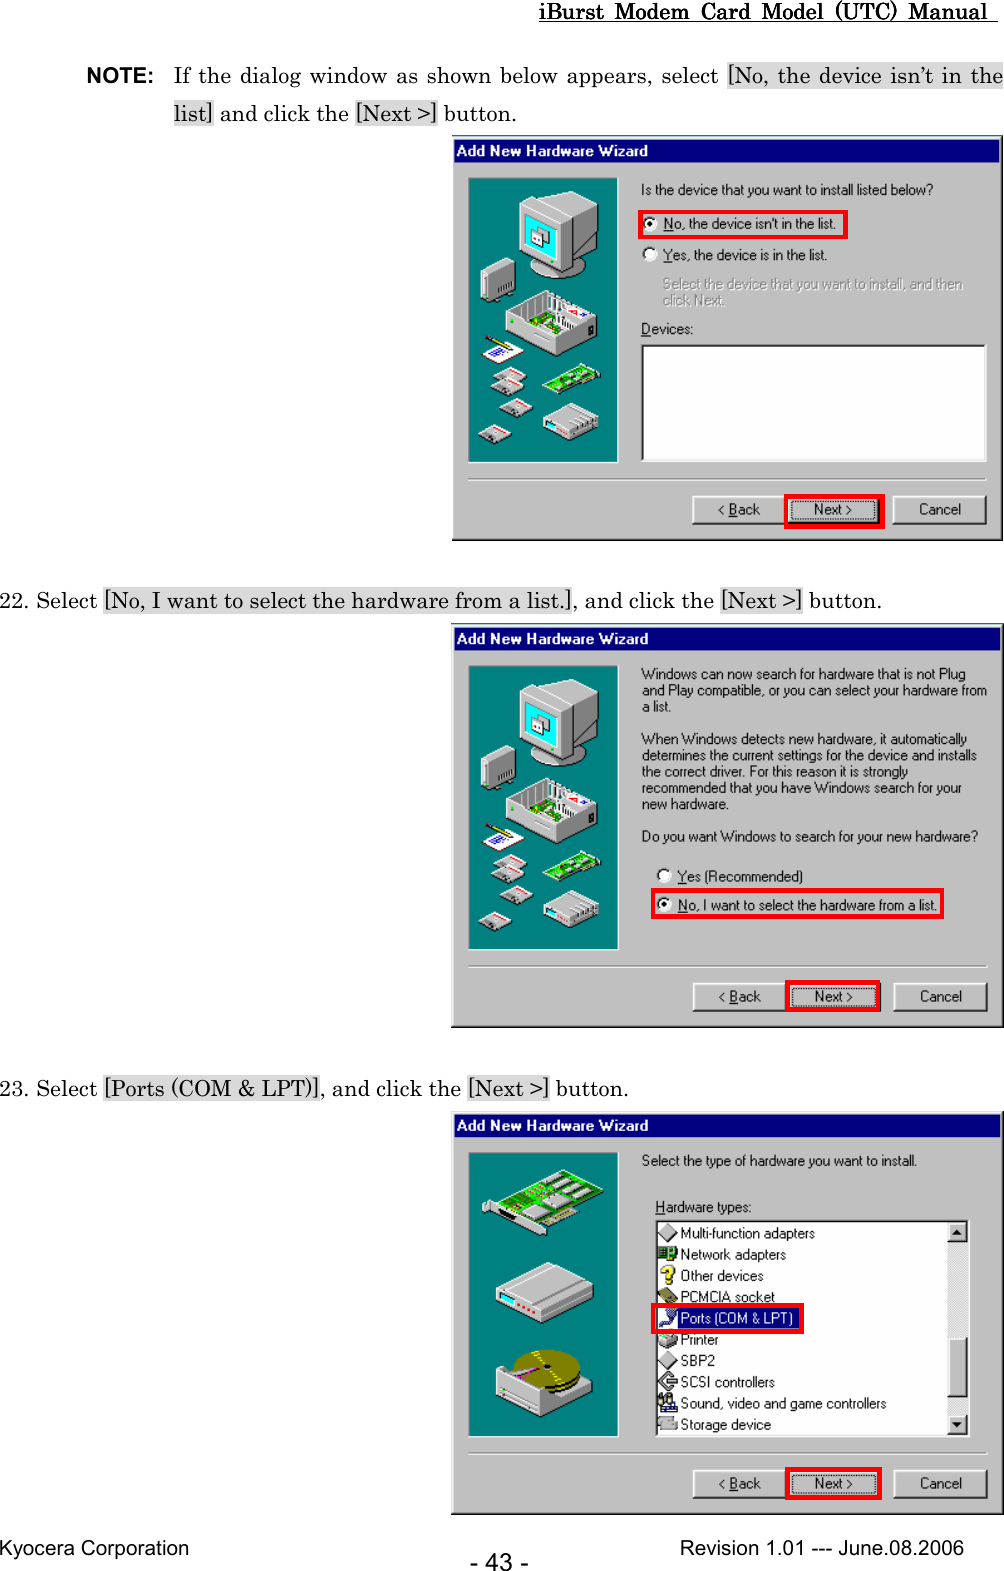 iBurst  Modem  Card  Model  (UTC)  Manual iBurst  Modem  Card  Model  (UTC)  Manual iBurst  Modem  Card  Model  (UTC)  Manual iBurst  Modem  Card  Model  (UTC)  Manual       Kyocera Corporation                                                                                              Revision 1.01 --- June.08.2006 - 43 - NOTE:  If the dialog window as shown below appears, select [No, the device isn’t in the list] and click the [Next &gt;] button.   22. Select [No, I want to select the hardware from a list.], and click the [Next &gt;] button.   23. Select [Ports (COM &amp; LPT)], and click the [Next &gt;] button.  